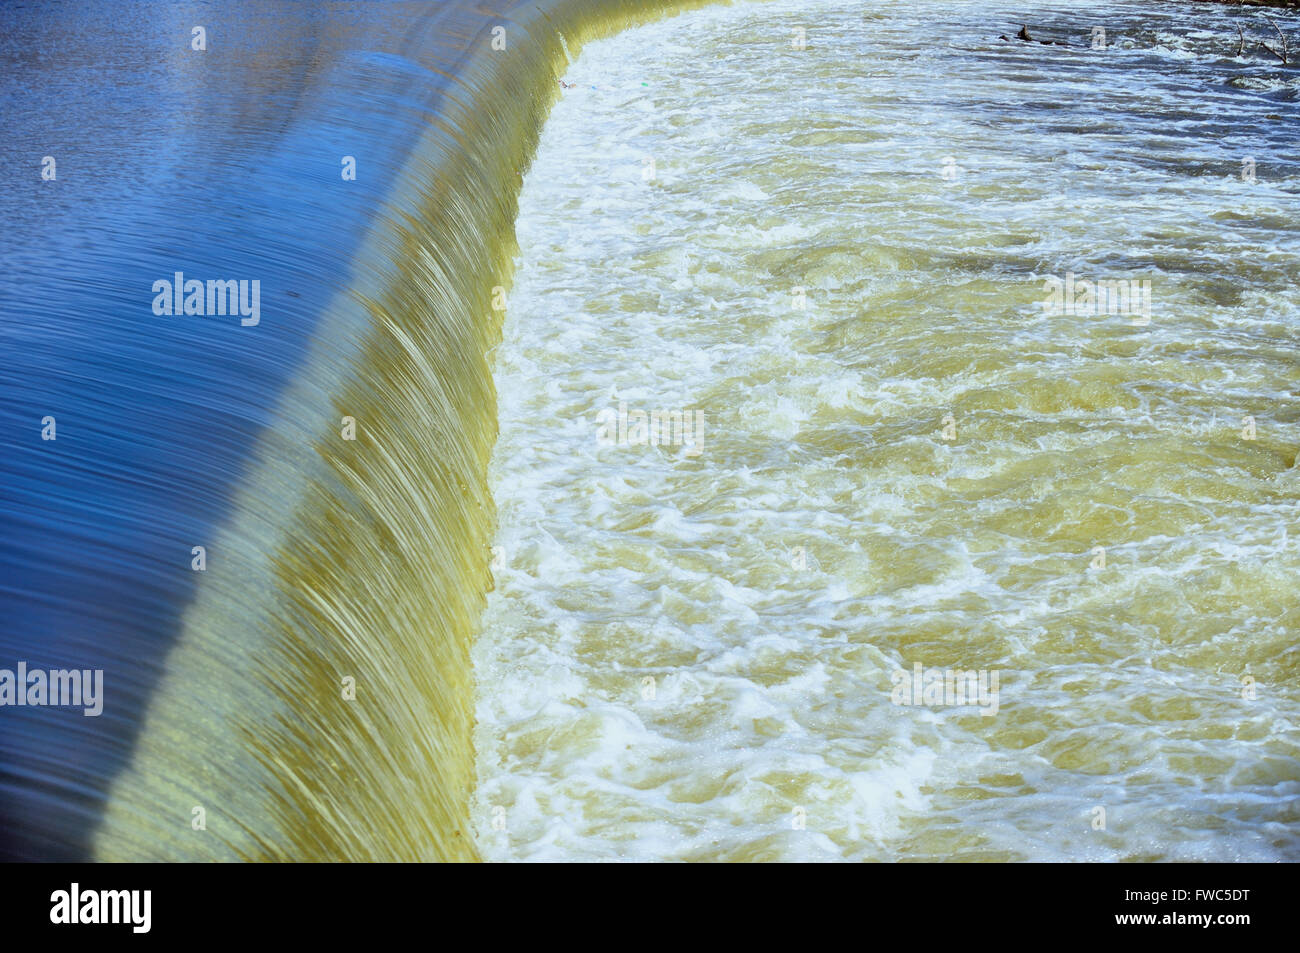 Rushing water pours over a Fox River dam in a swirl of activity. South Elgin, Illinois, USA. Stock Photo